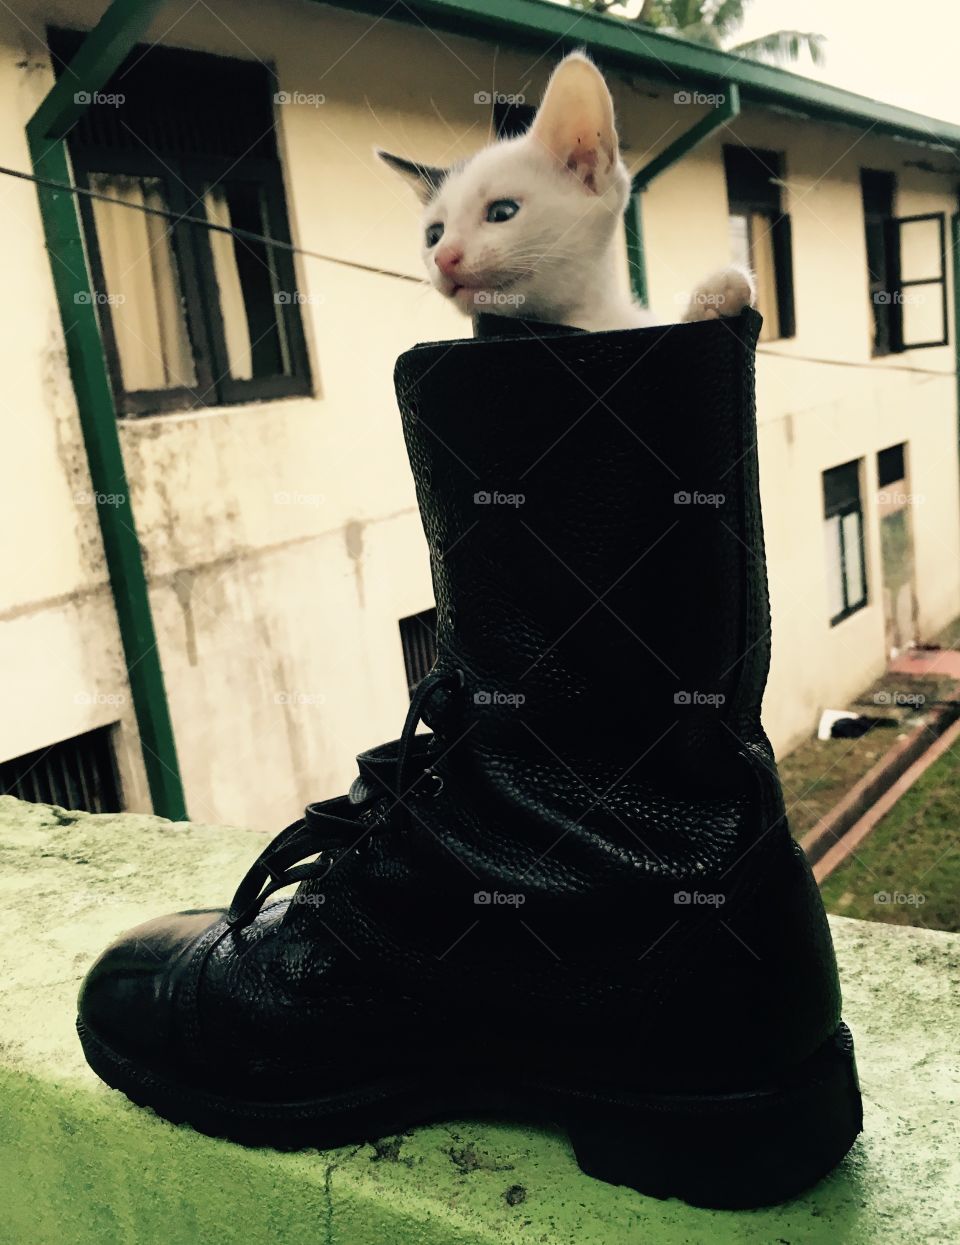 Kitty cat in boot